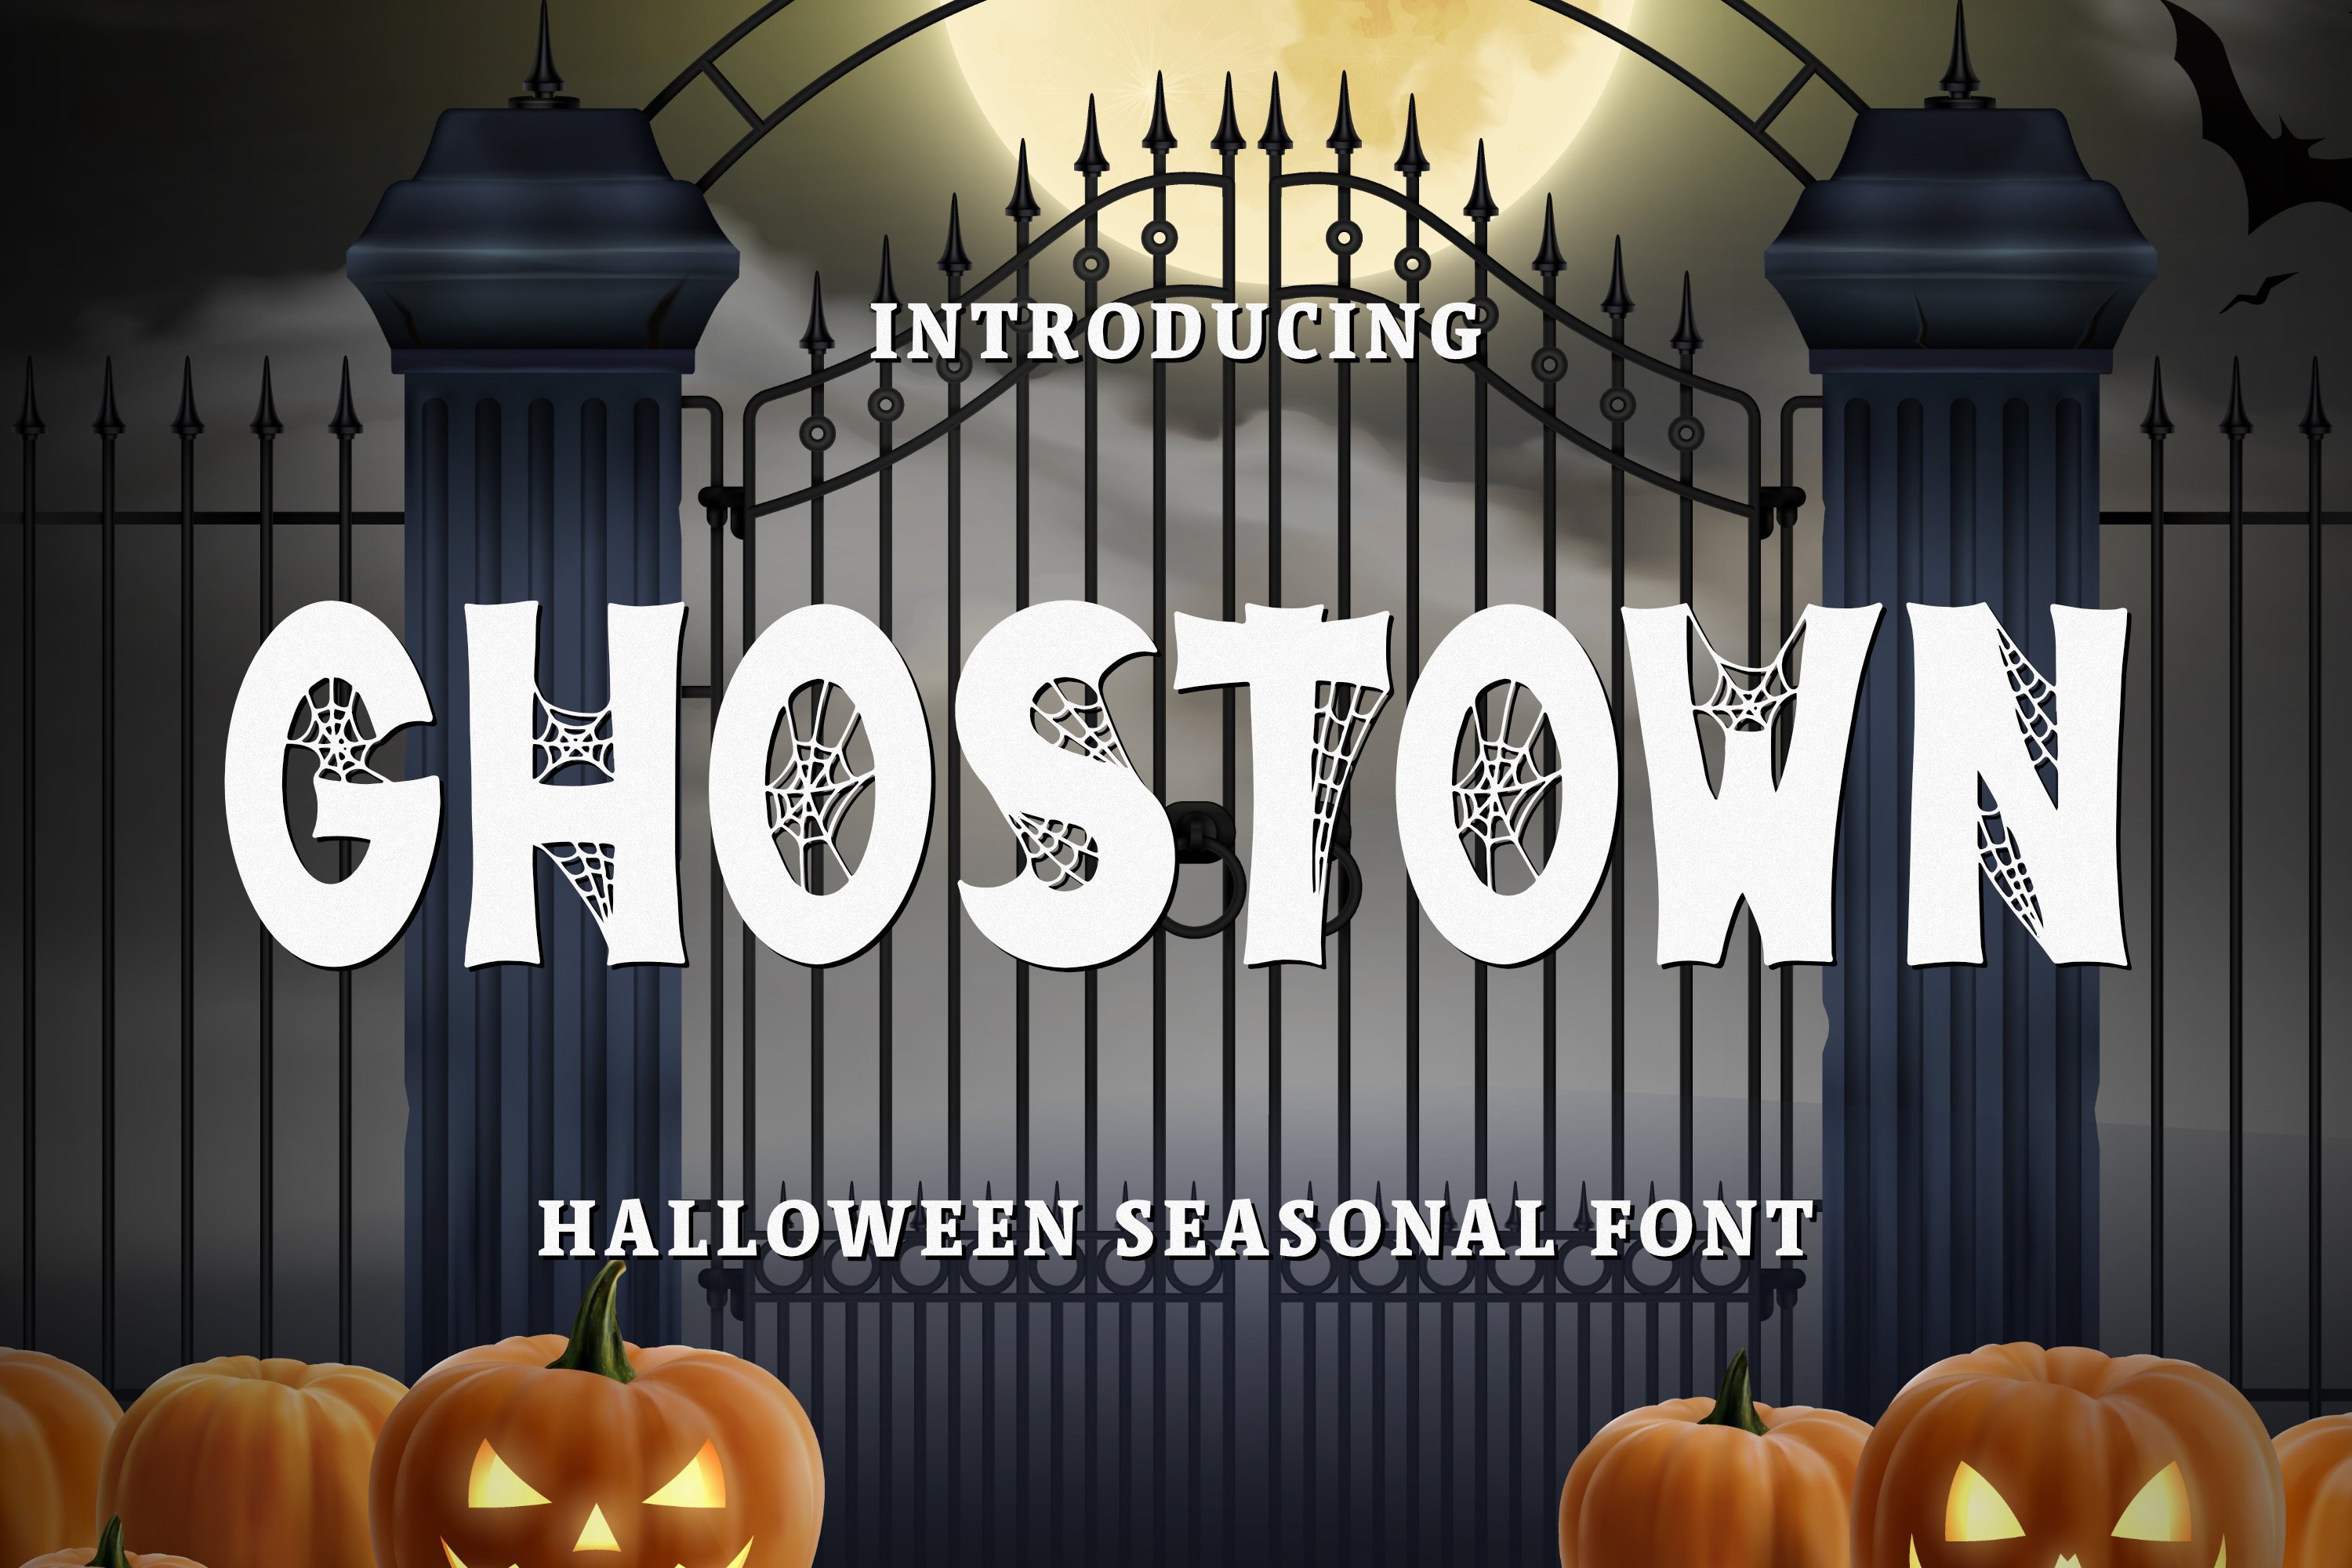 Ghostown - Halloween Display Font cover image.